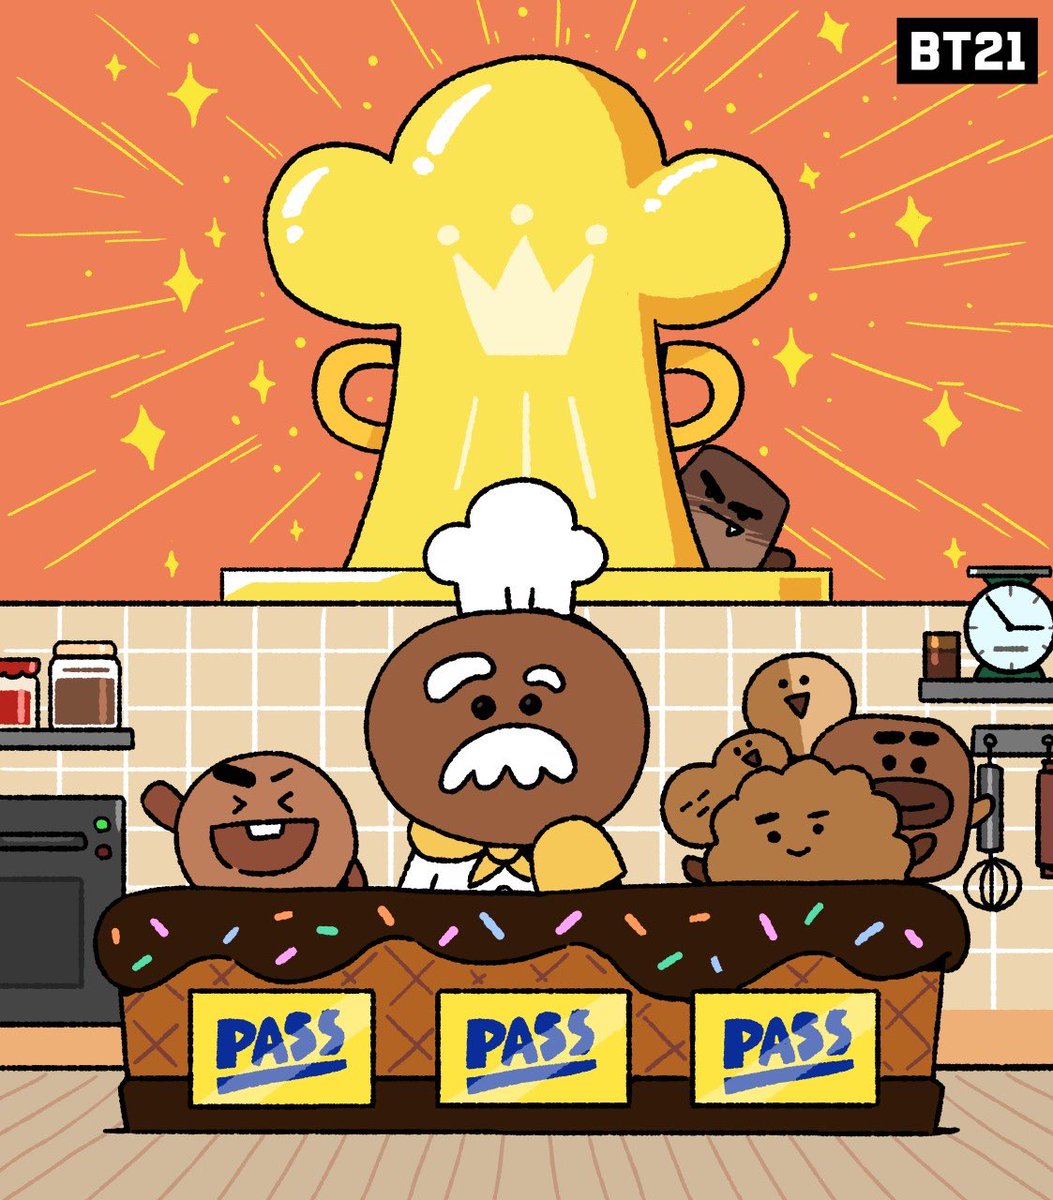 🍪ATTENTION ALL DARING BAKERS🍪

Are YOU a confident baker? 
Can YOU inspire the CRUNCHY SQUAD?

Then show us your best baking skills
with #SHOOKY_BAKINGCHALLENGE 

You know we're quite the picky squad 😉
Make us proud ❤️

#MUSTAHU #SHOOKY #CRUNCHYSQUAD 
#BakingChallenge #BT21